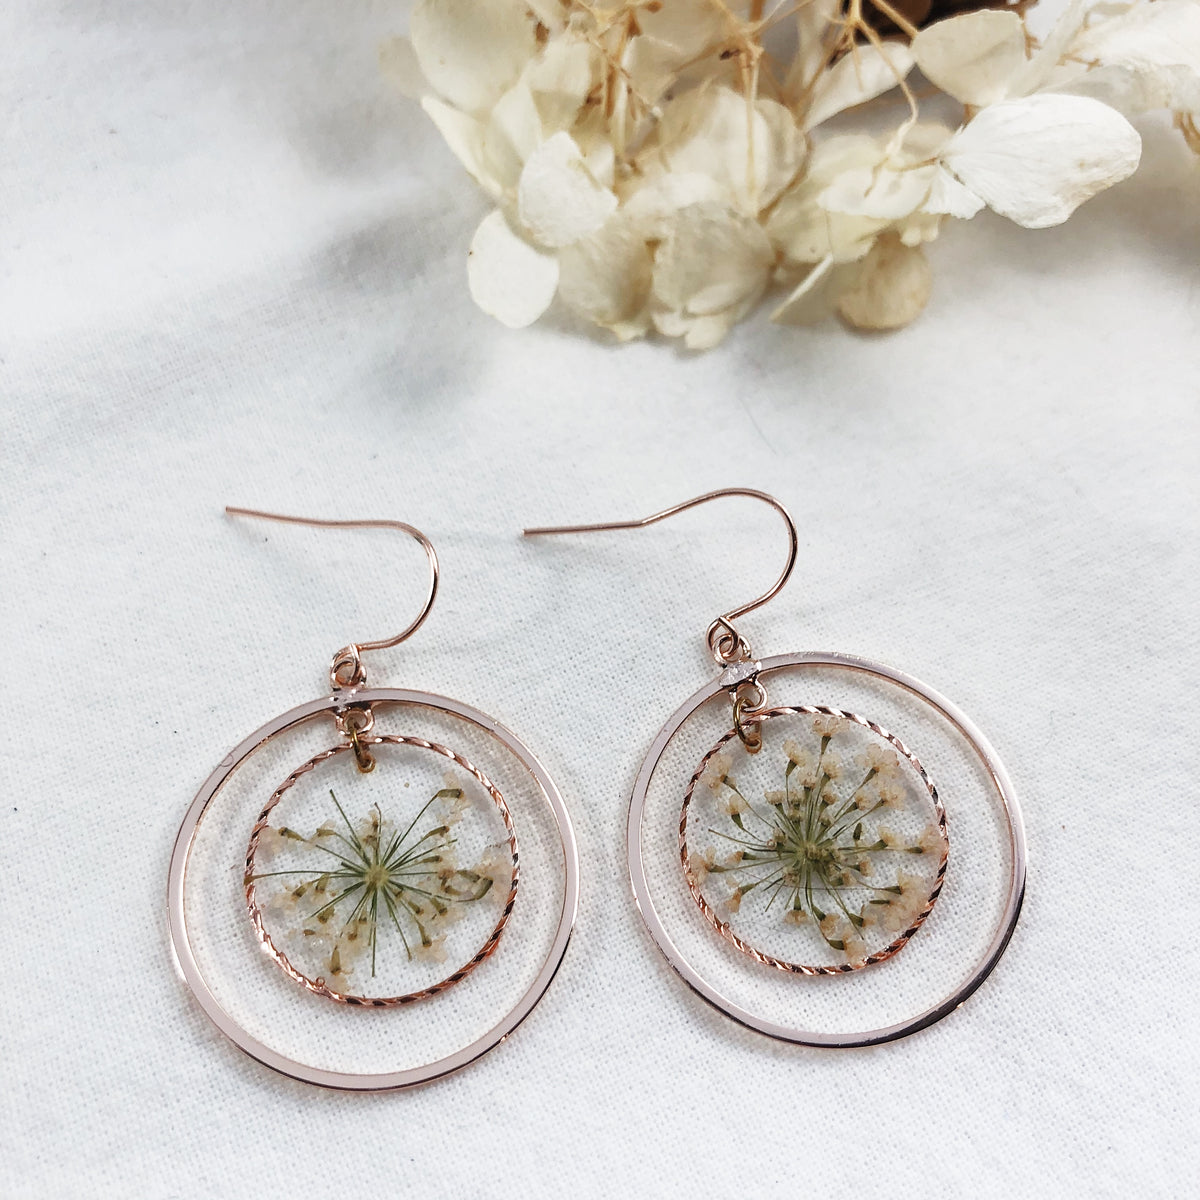 Queen Anne Classic Gold Earrings with Pressed Flowers